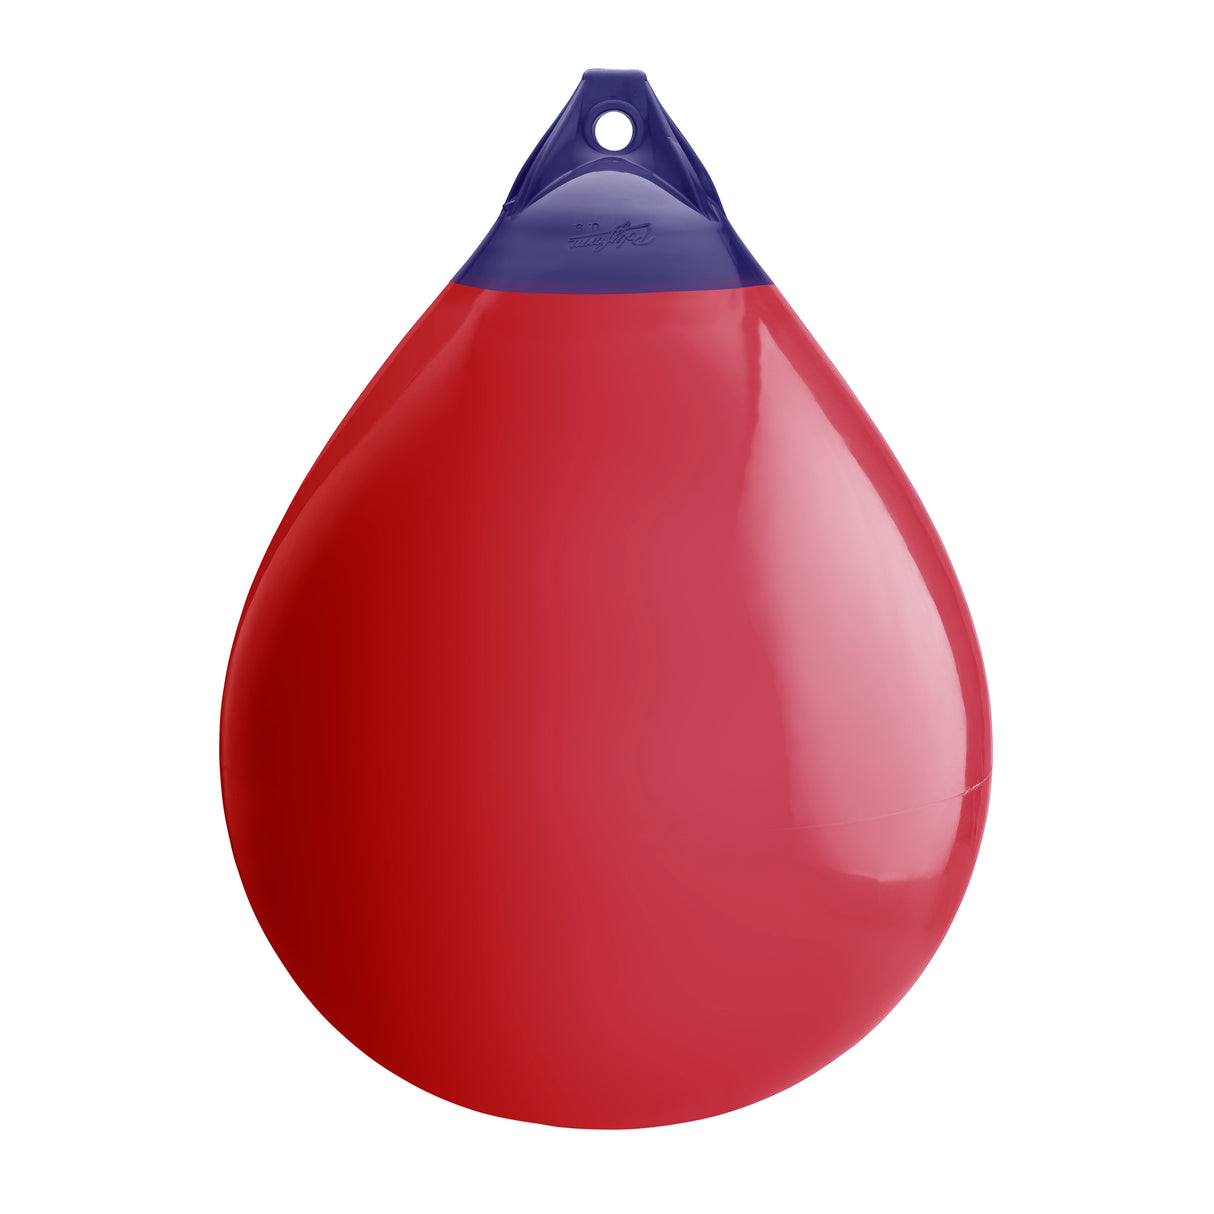 Classic Red inflatable buoy, Polyform A-7 